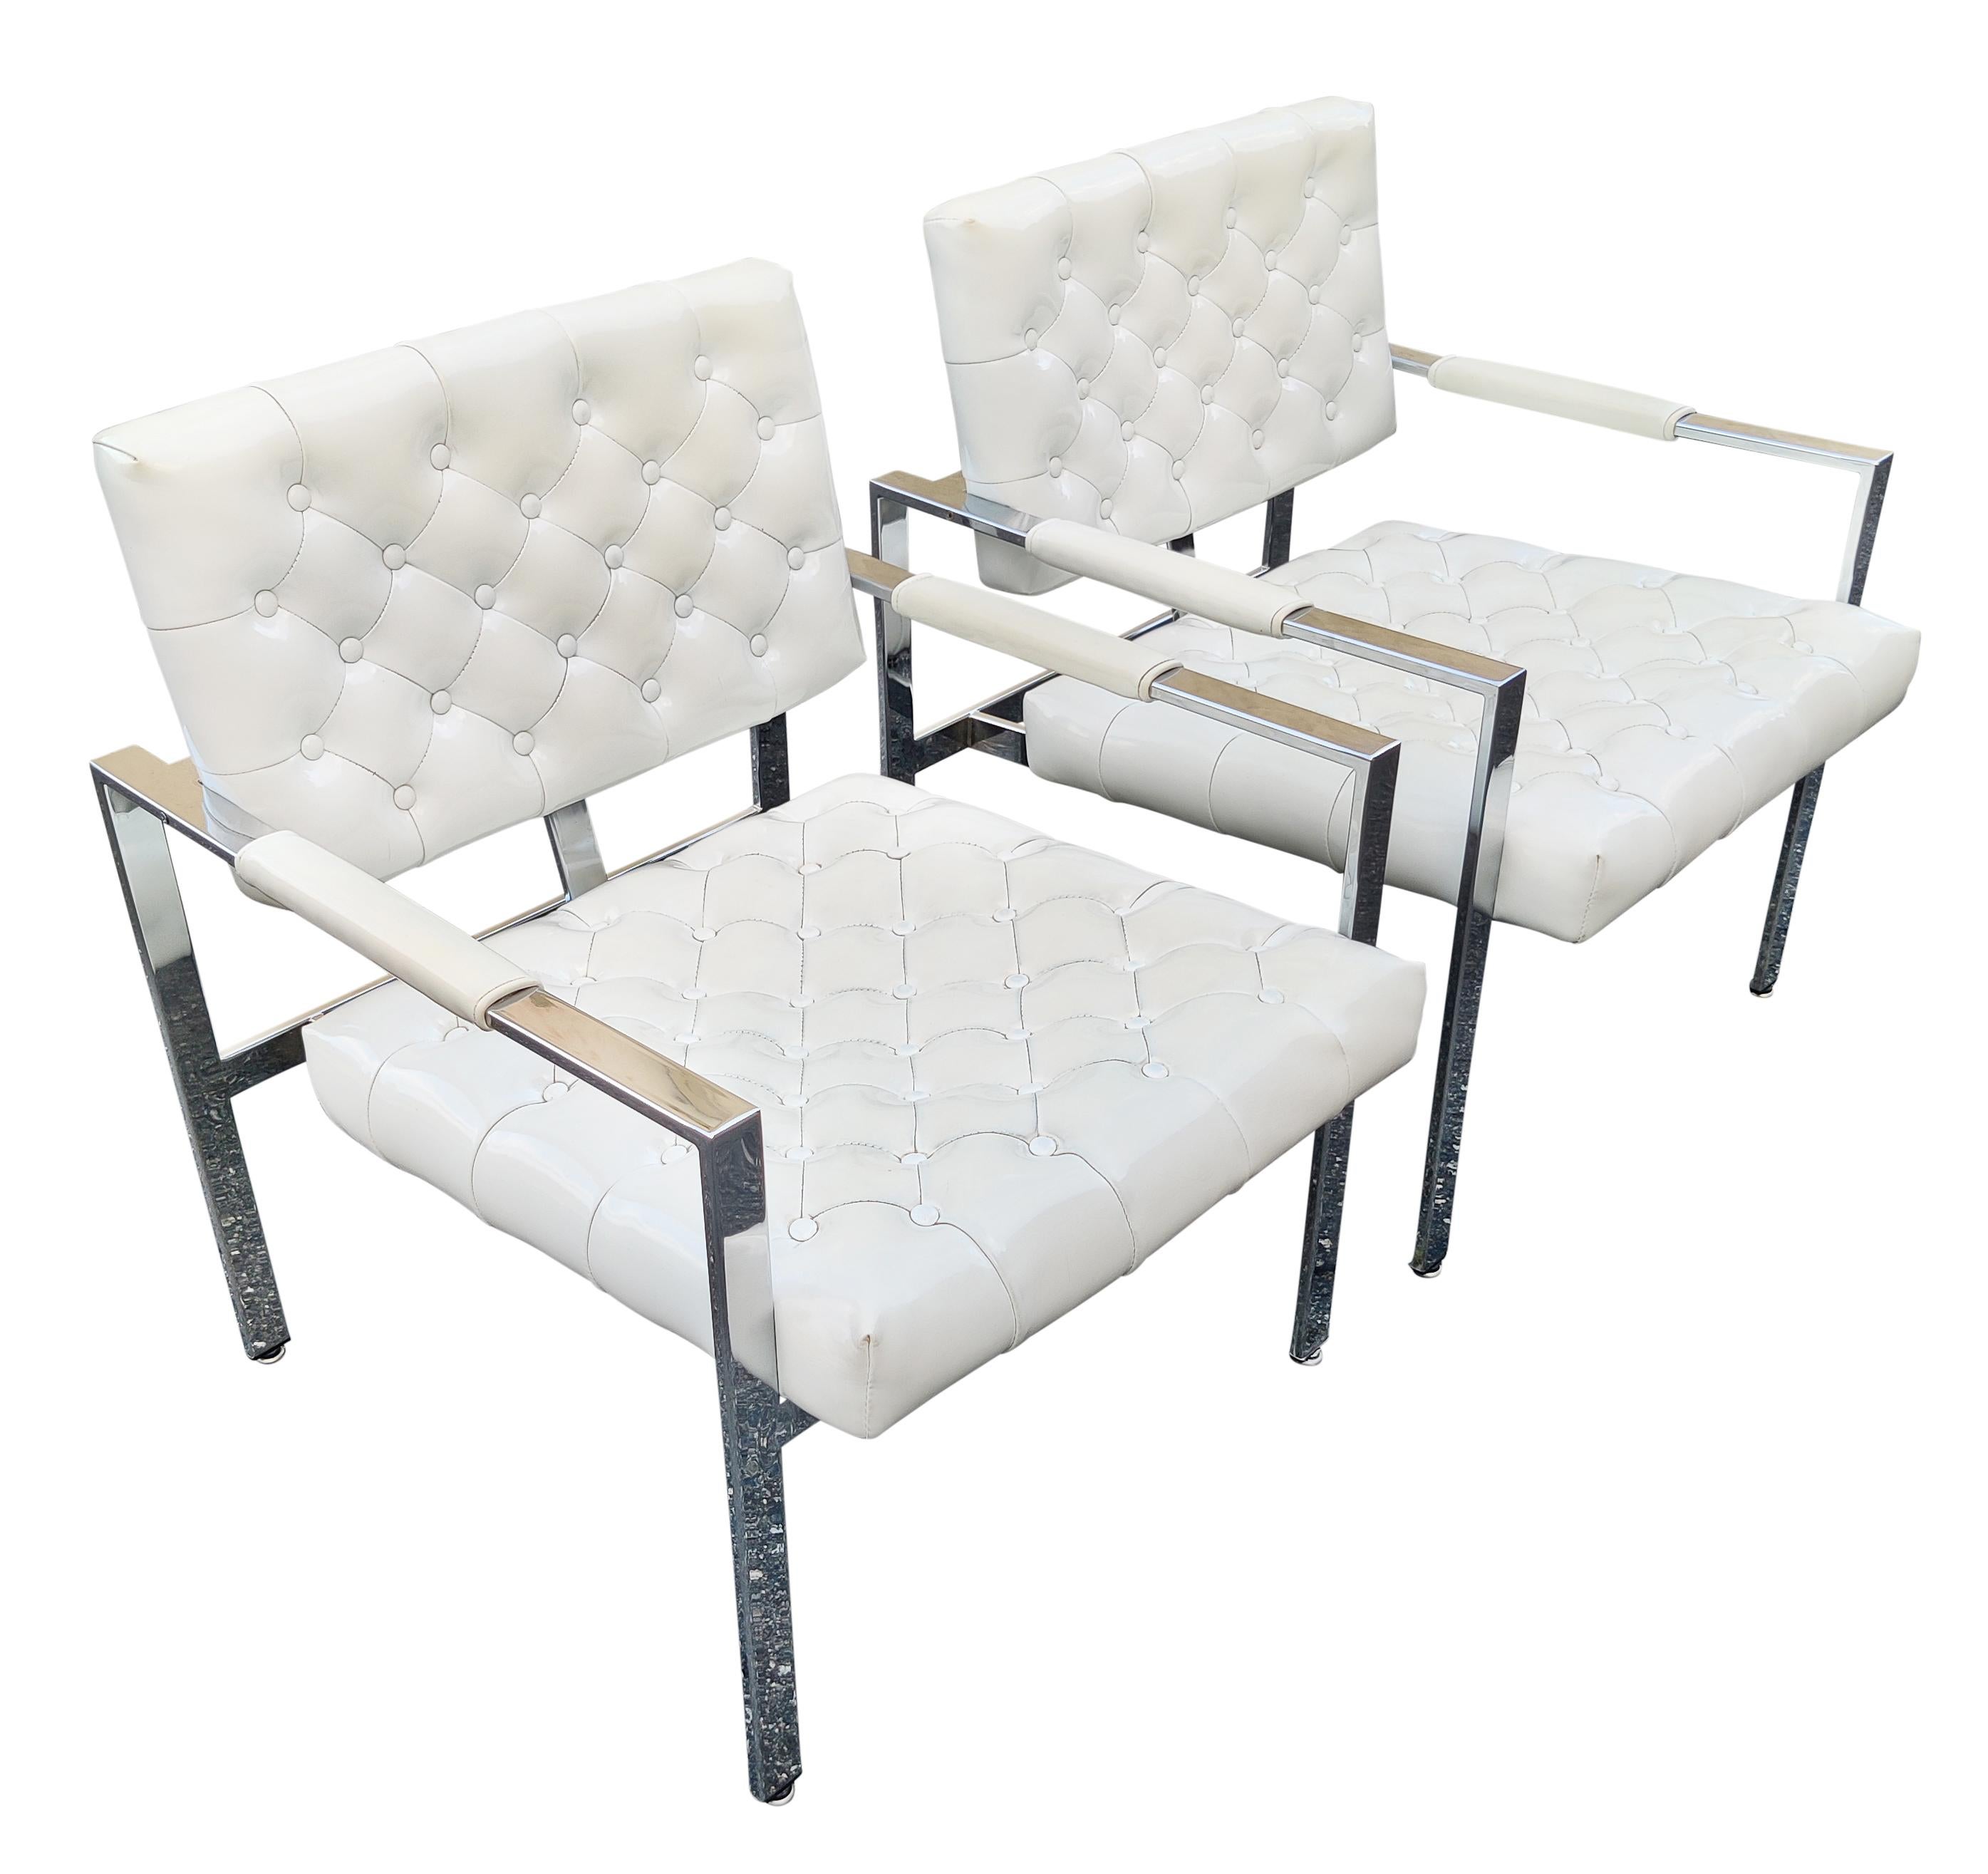 A very clean all original pair of armchairs or lounge chairs designed by Milo Baughman and manufactured by Thayer Coggin! This signed pair of chairs has super clean and bright chrome finished frames. The original slightly off white shinny vinyl